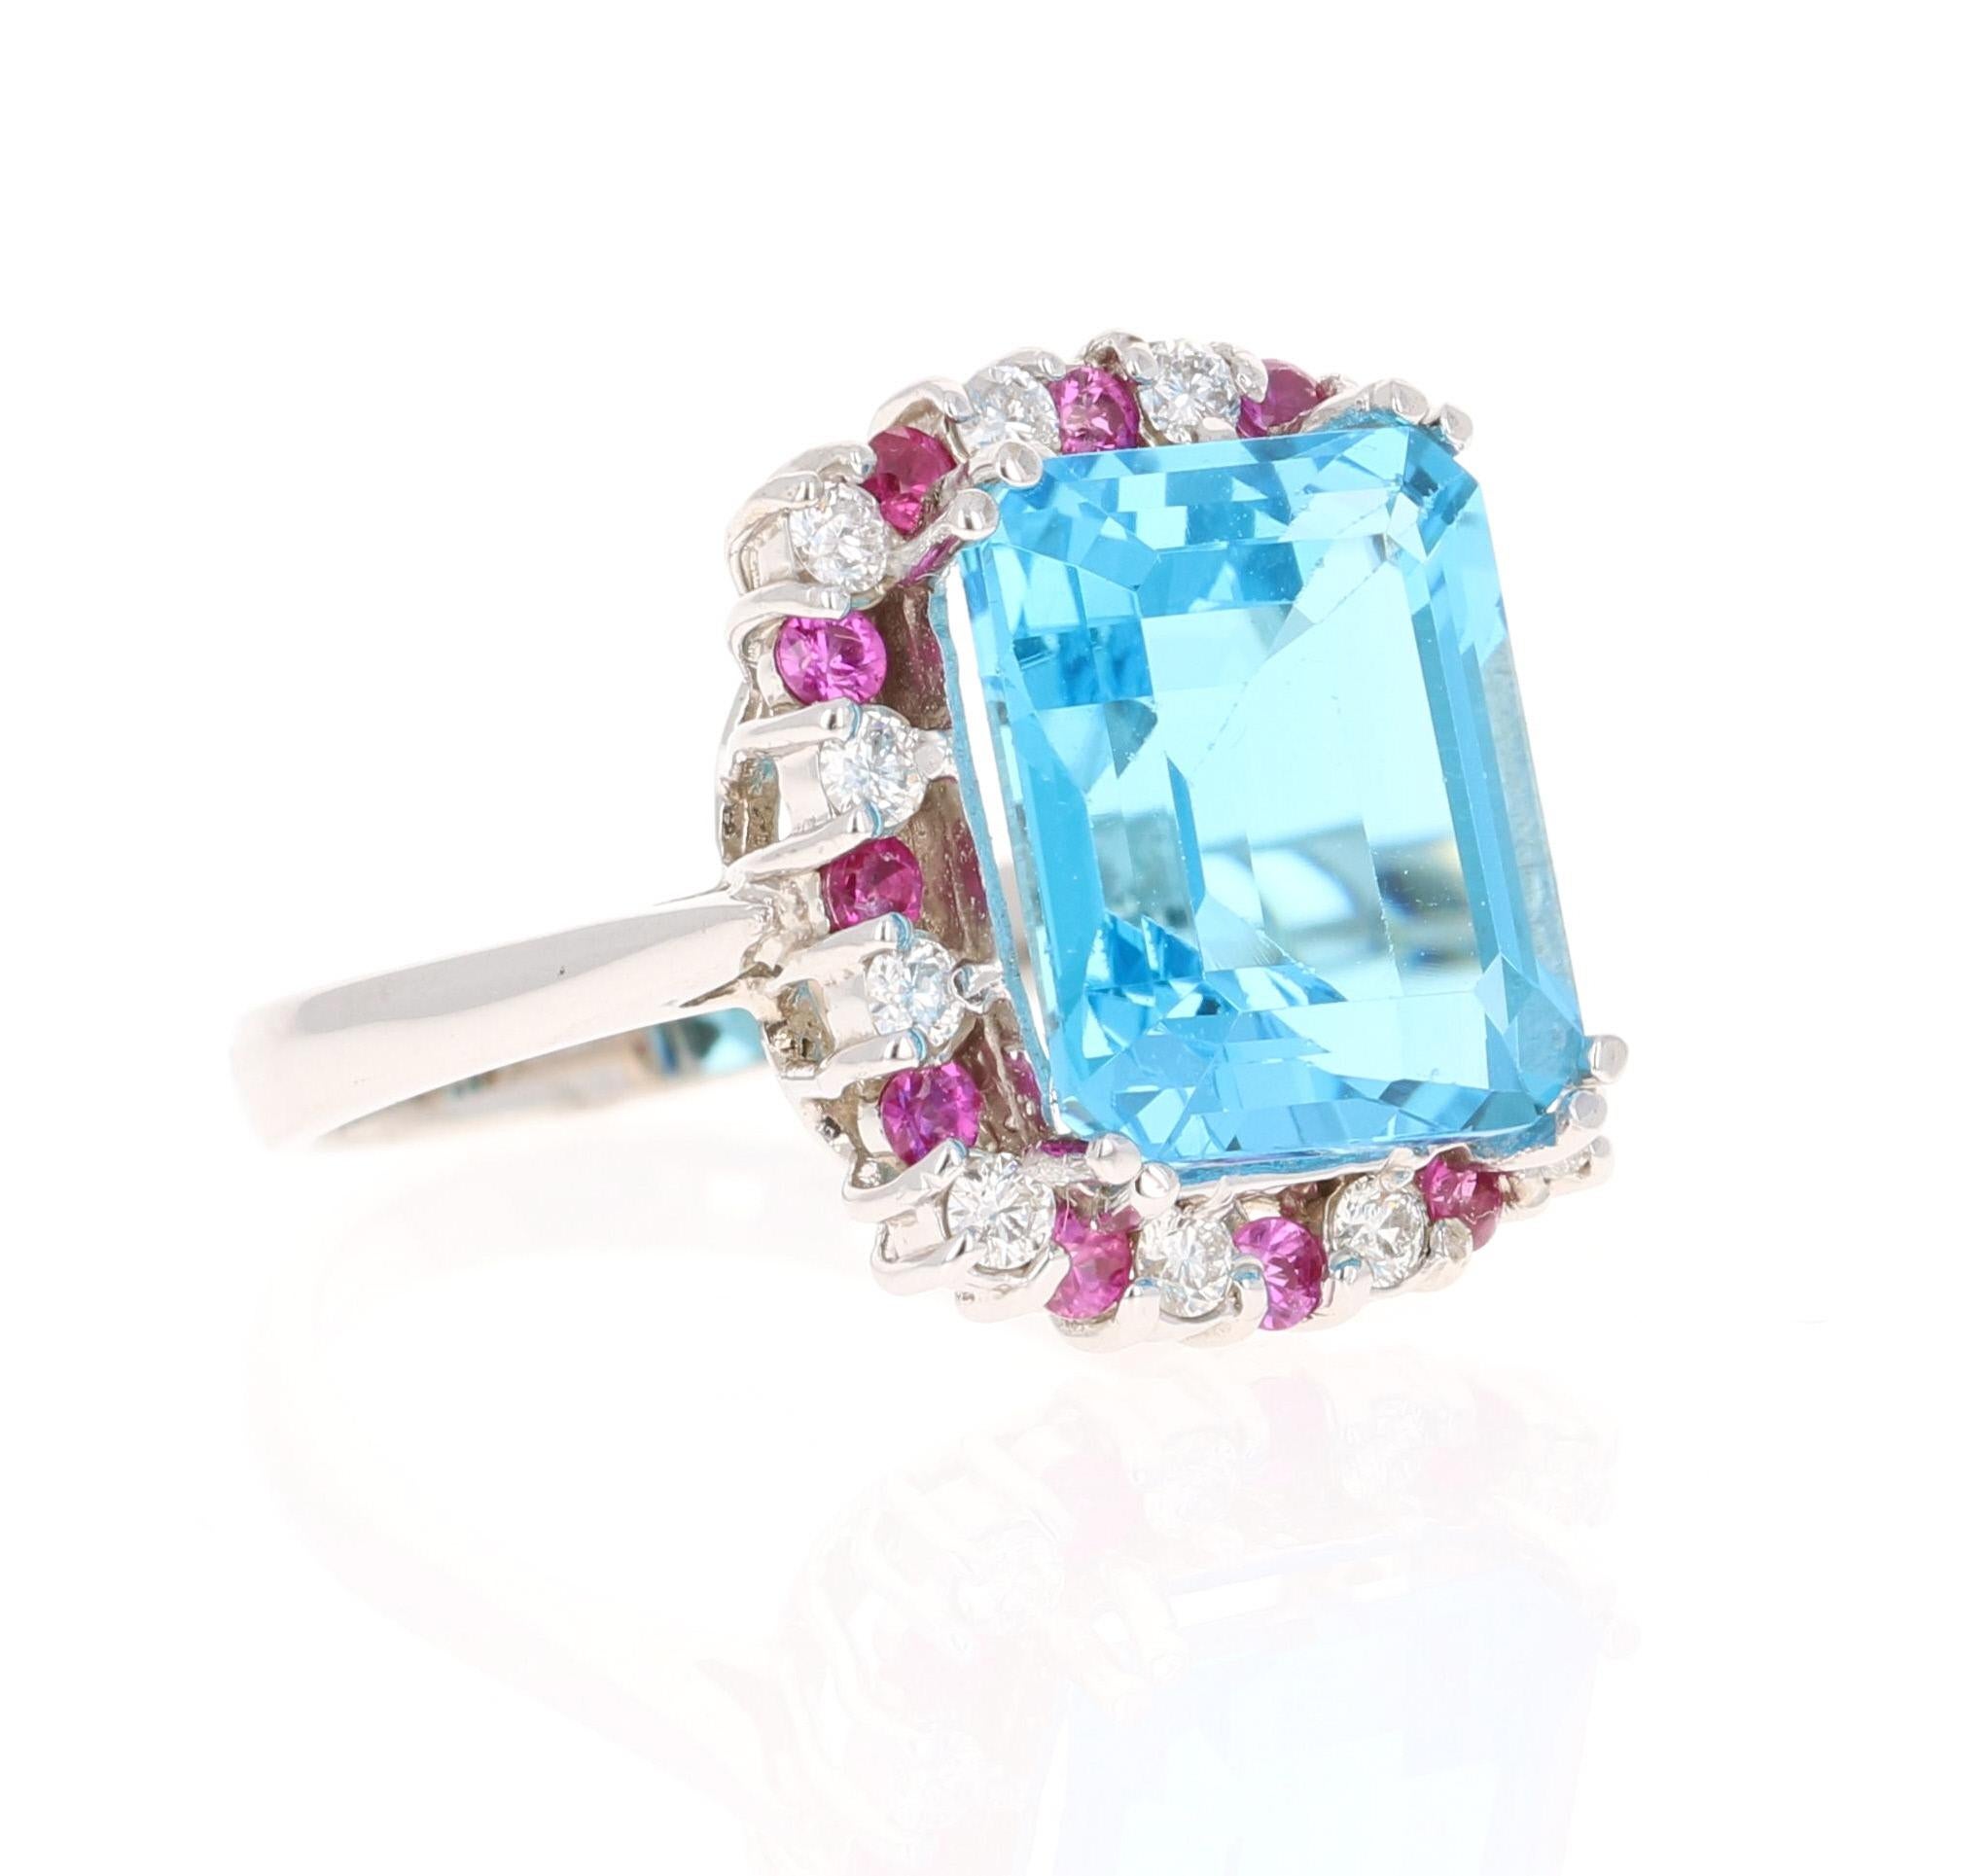 This stunning statement ring has a Emerald Cut Blue Topaz that weighs 8.15 carats. 
The blue topaz is 12 mm x 10 mm.  
It is surrounded by a halo of Pink Sapphires that weigh 0.40 carats and Diamonds that weigh 0.38 carats (Clarity: SI, Color: F)